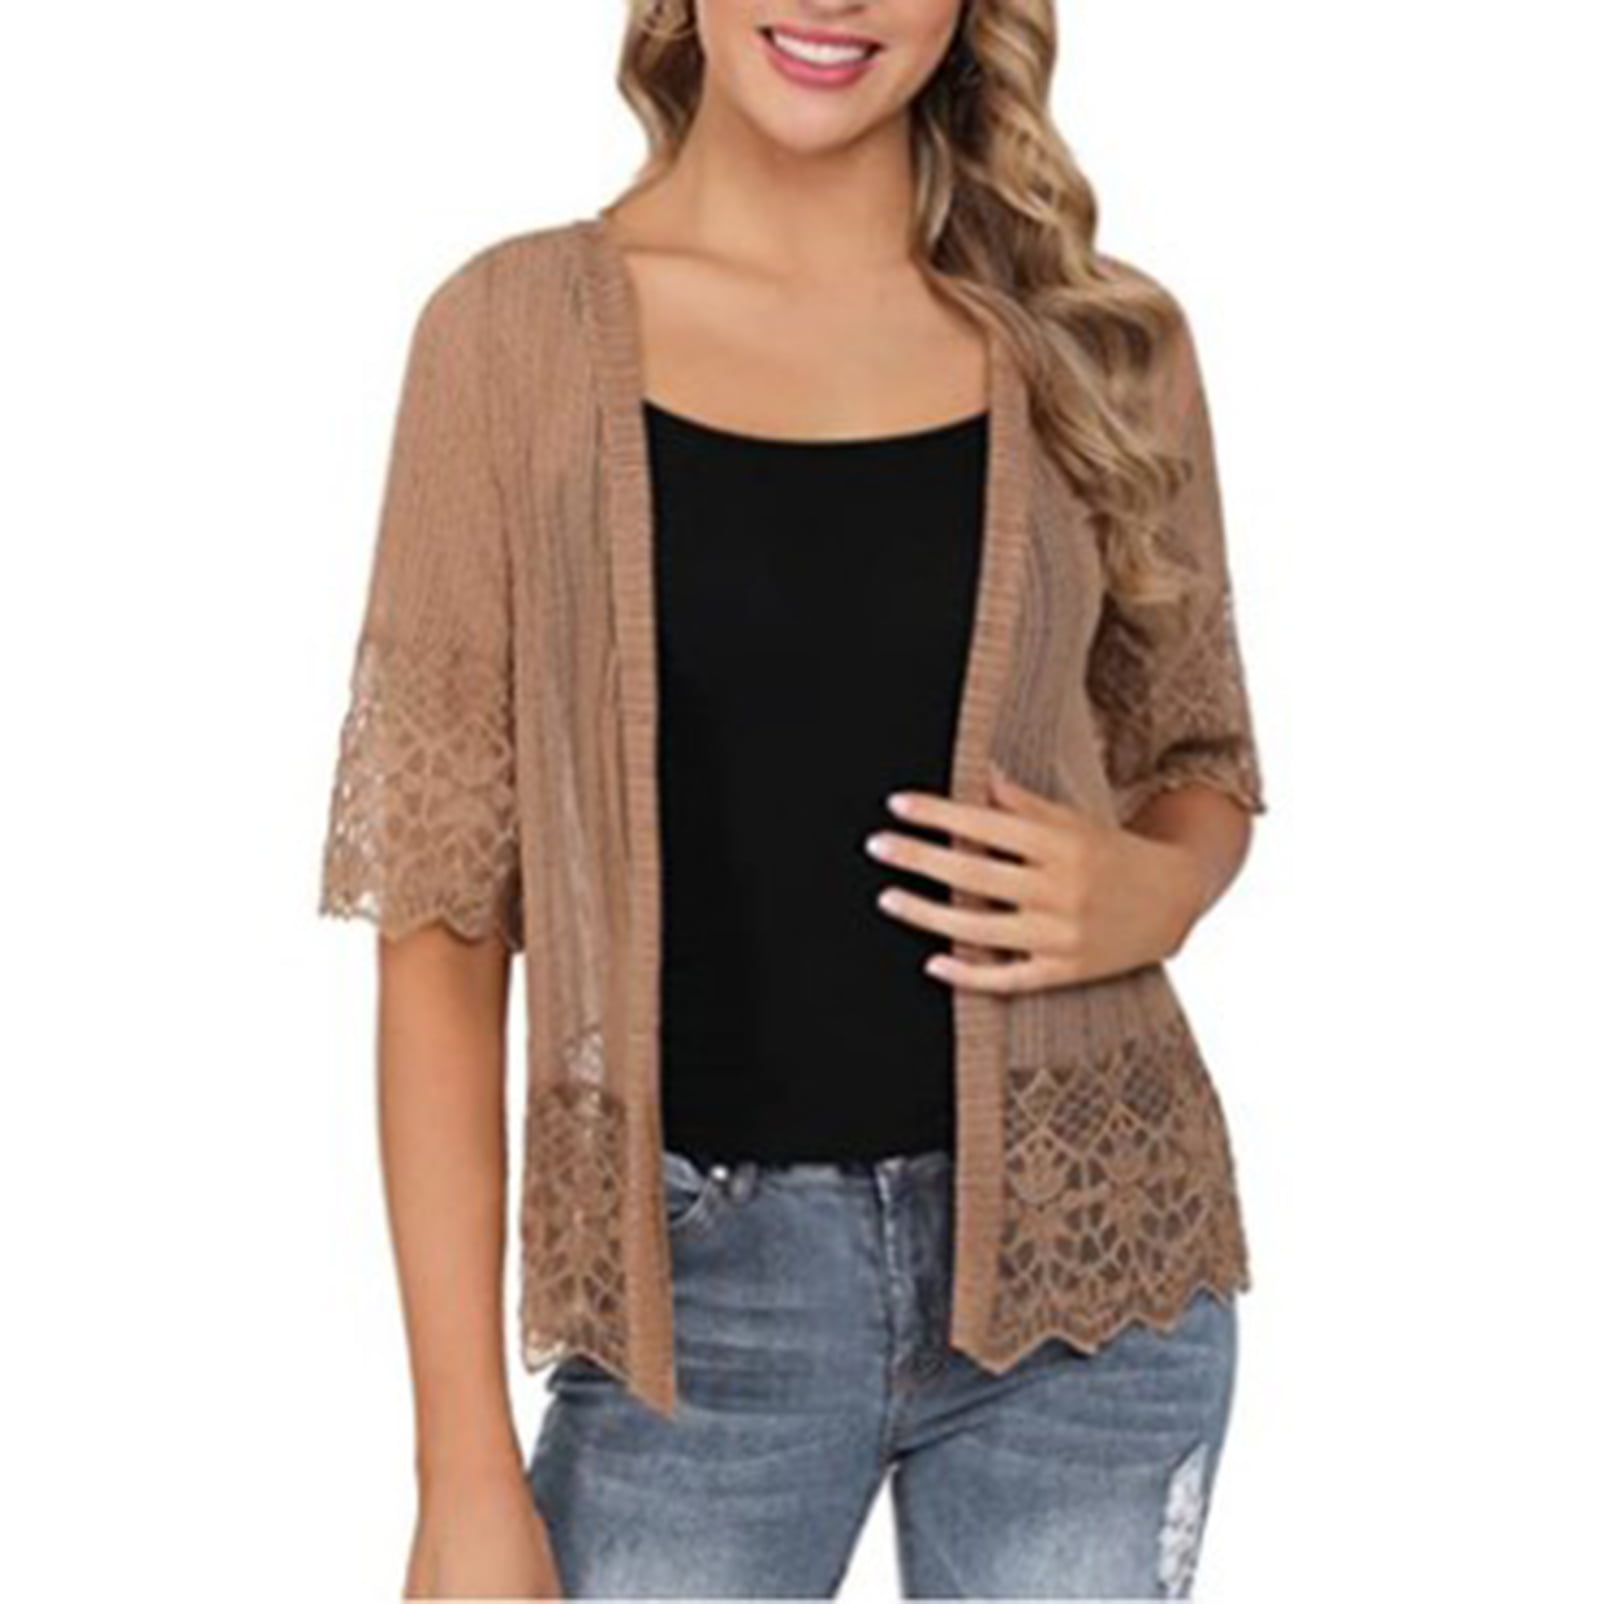 New Ladies Plus Size Floral Lace Open Cardigan Short Sleeve Womens Waterfall Top 